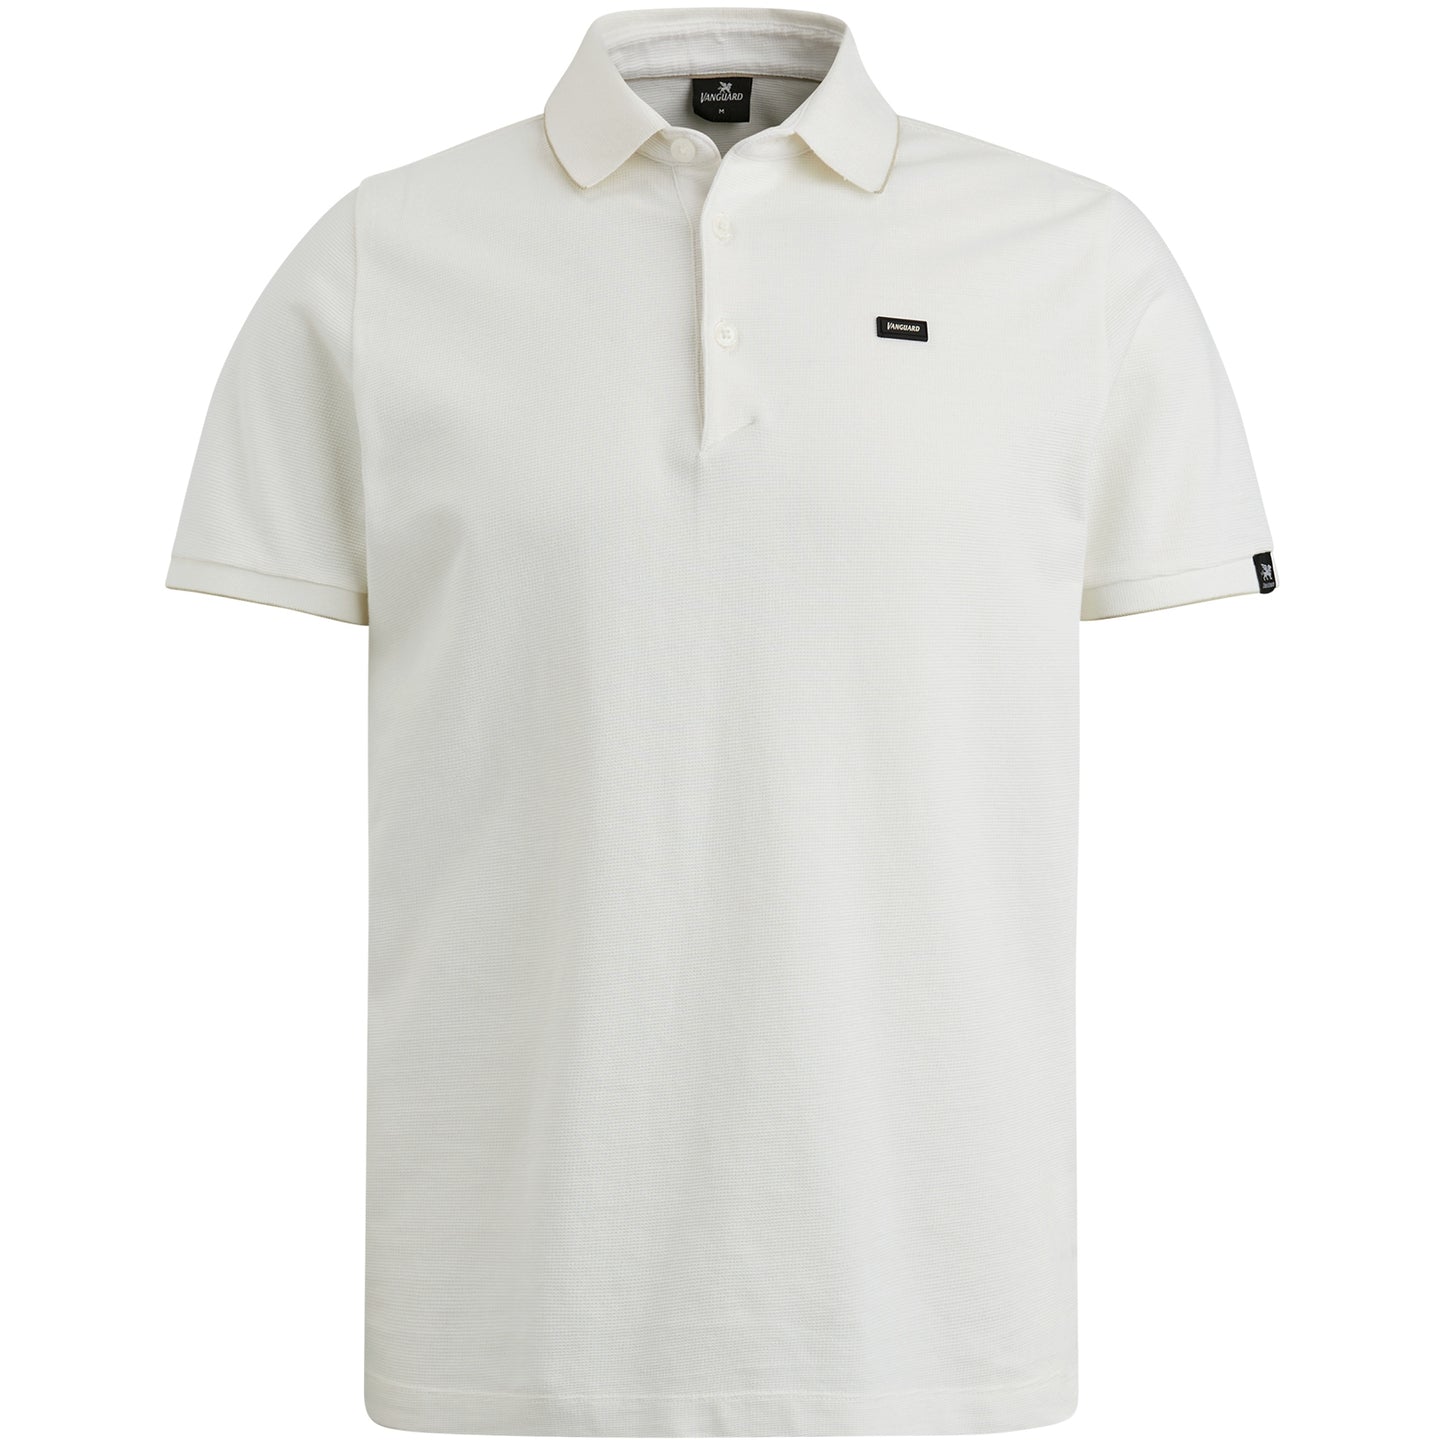 Short sleeve polo pique waffle structure